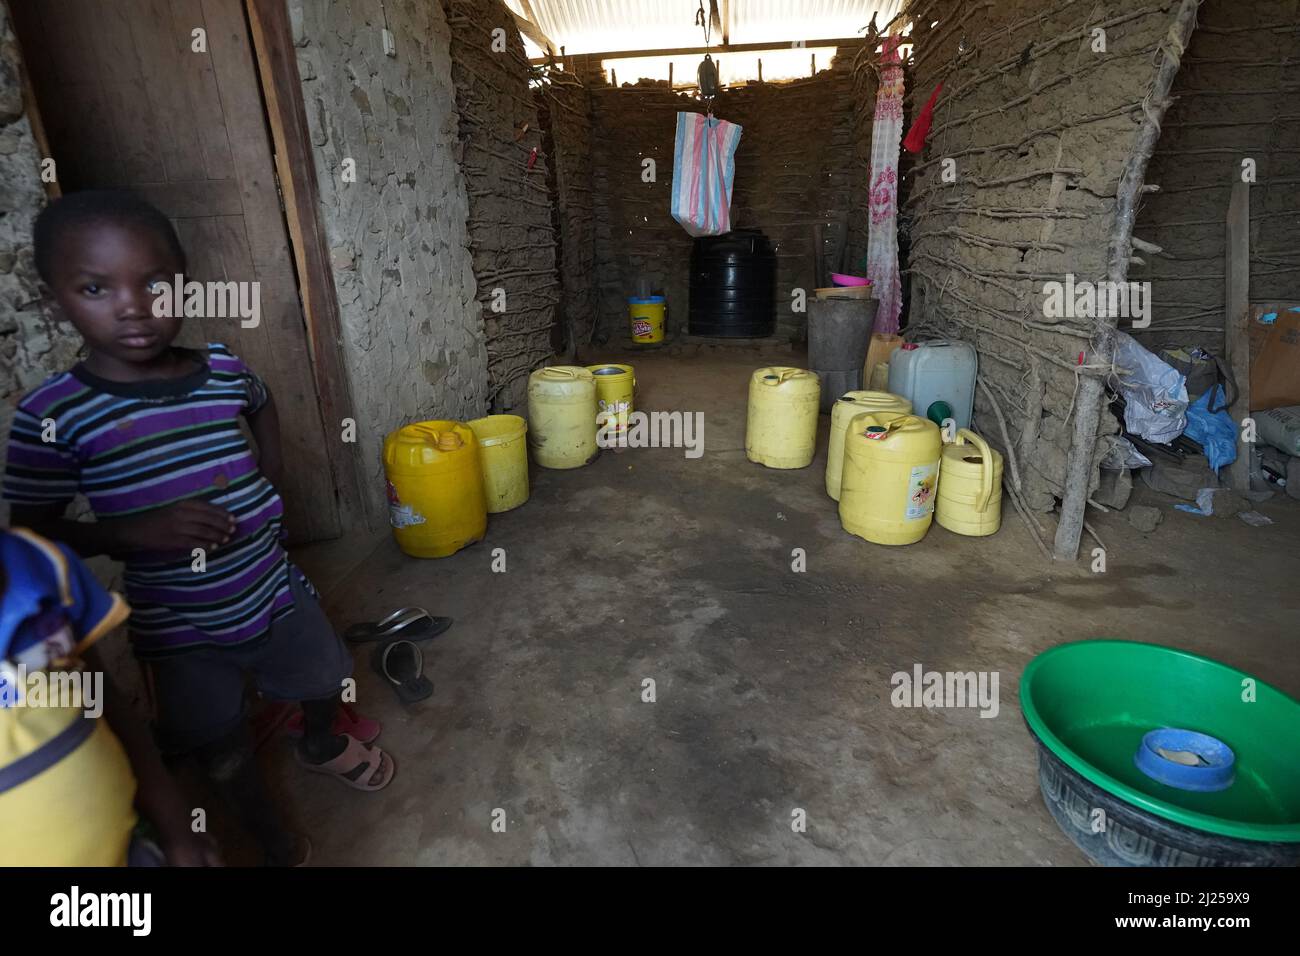 (220330) -- KILIFI, March 30, 2022 (Xinhua) -- Buckets of water are seen in Caroline's house in Kidemu sub-location in Kilifi County, Kenya, March 23, 2022. Scattered on the five-acre farm in Bandari village, Kidemu sub-location in Kenya's coastal Kilifi County, were withered maize crops. Adam Ndamunga, an officer with Kenya National Drought Management Authority (NDMA) in Kilifi, said the drought situation in the region started in August 2021 and has been progressing due to inadequate rains. The United Nations relief agency said the Horn of Africa is experiencing one of its worst drough Stock Photo